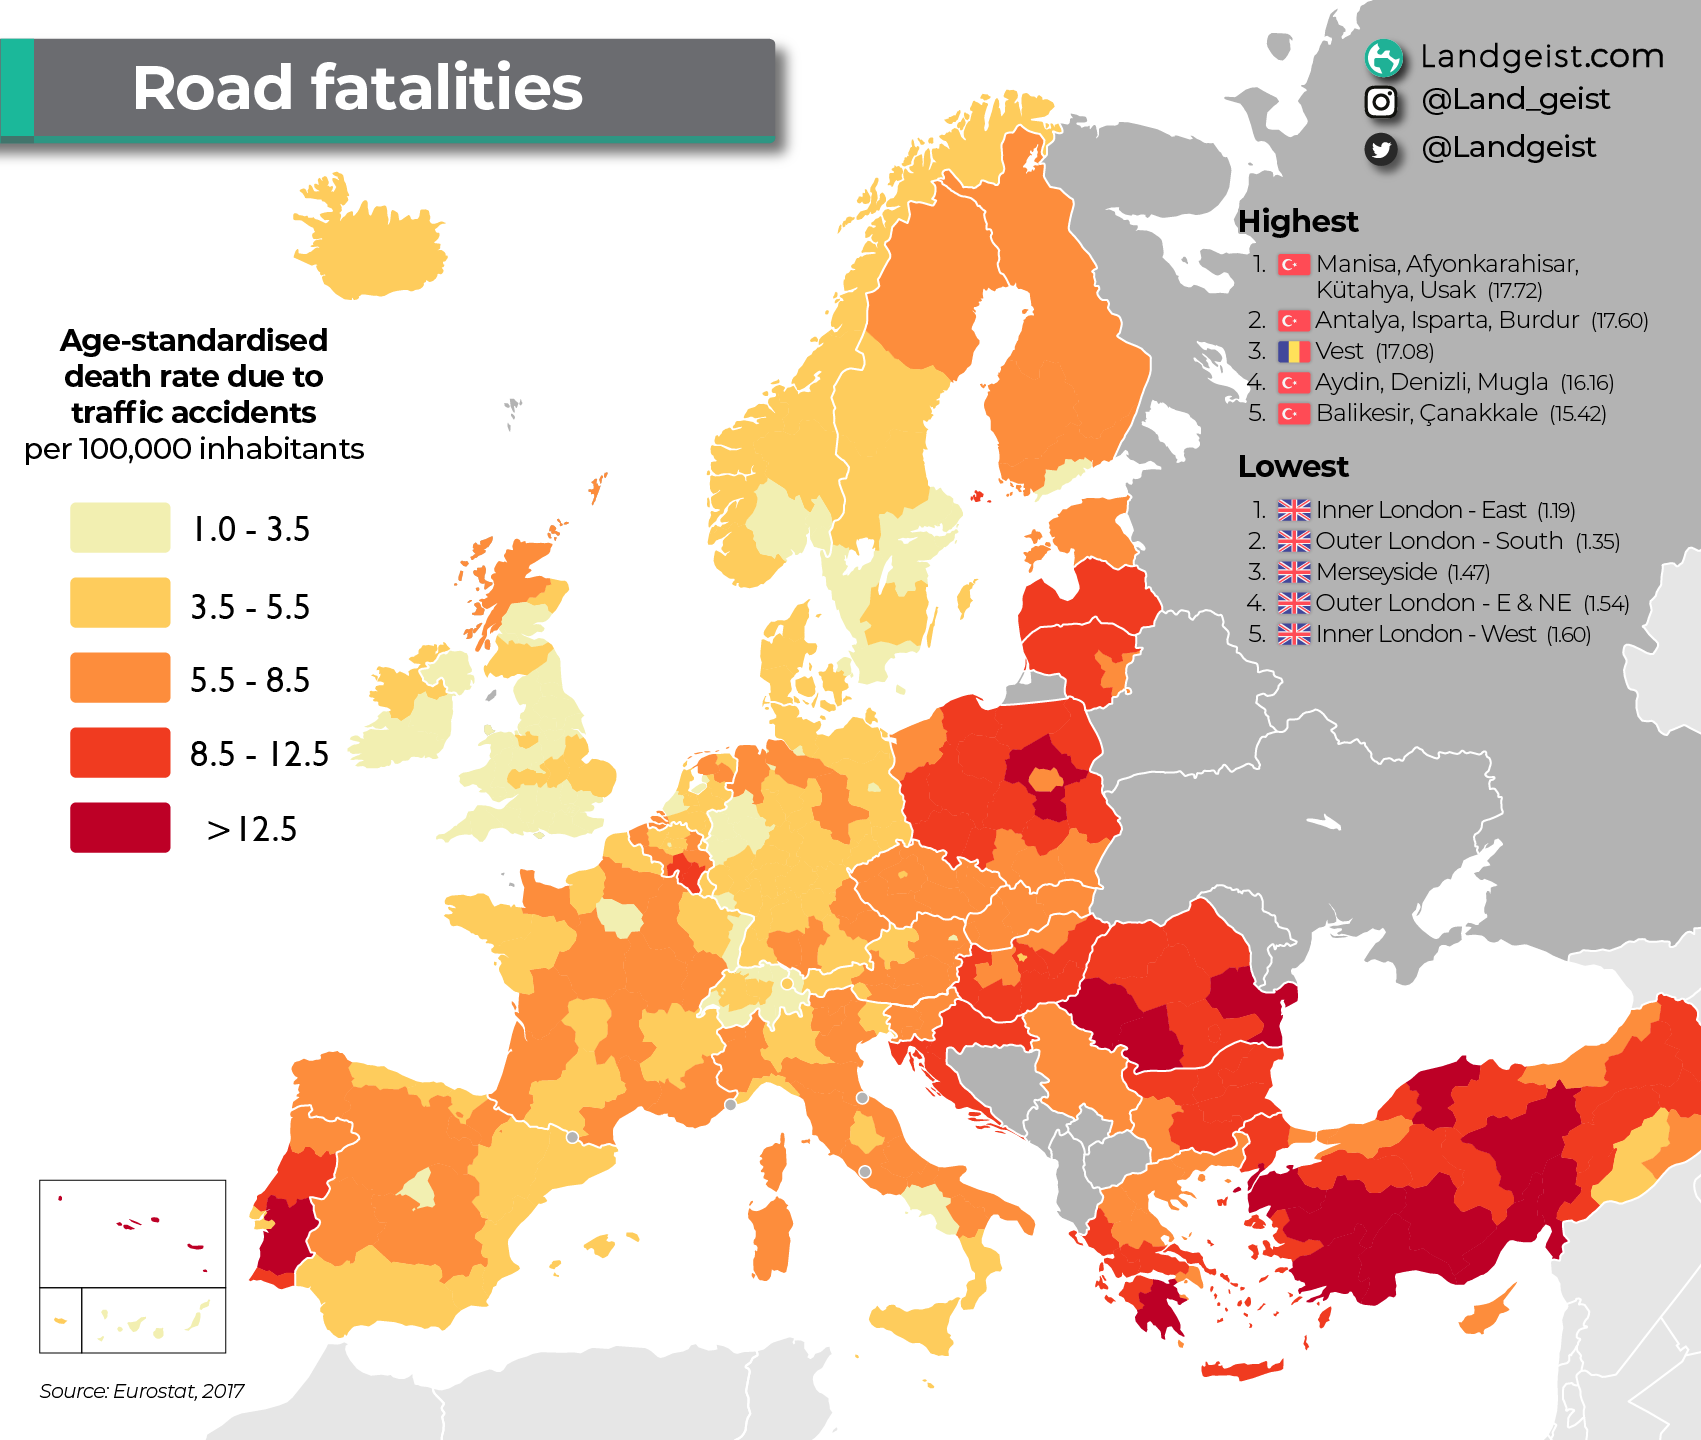 Map of the road fatalities in Europe.